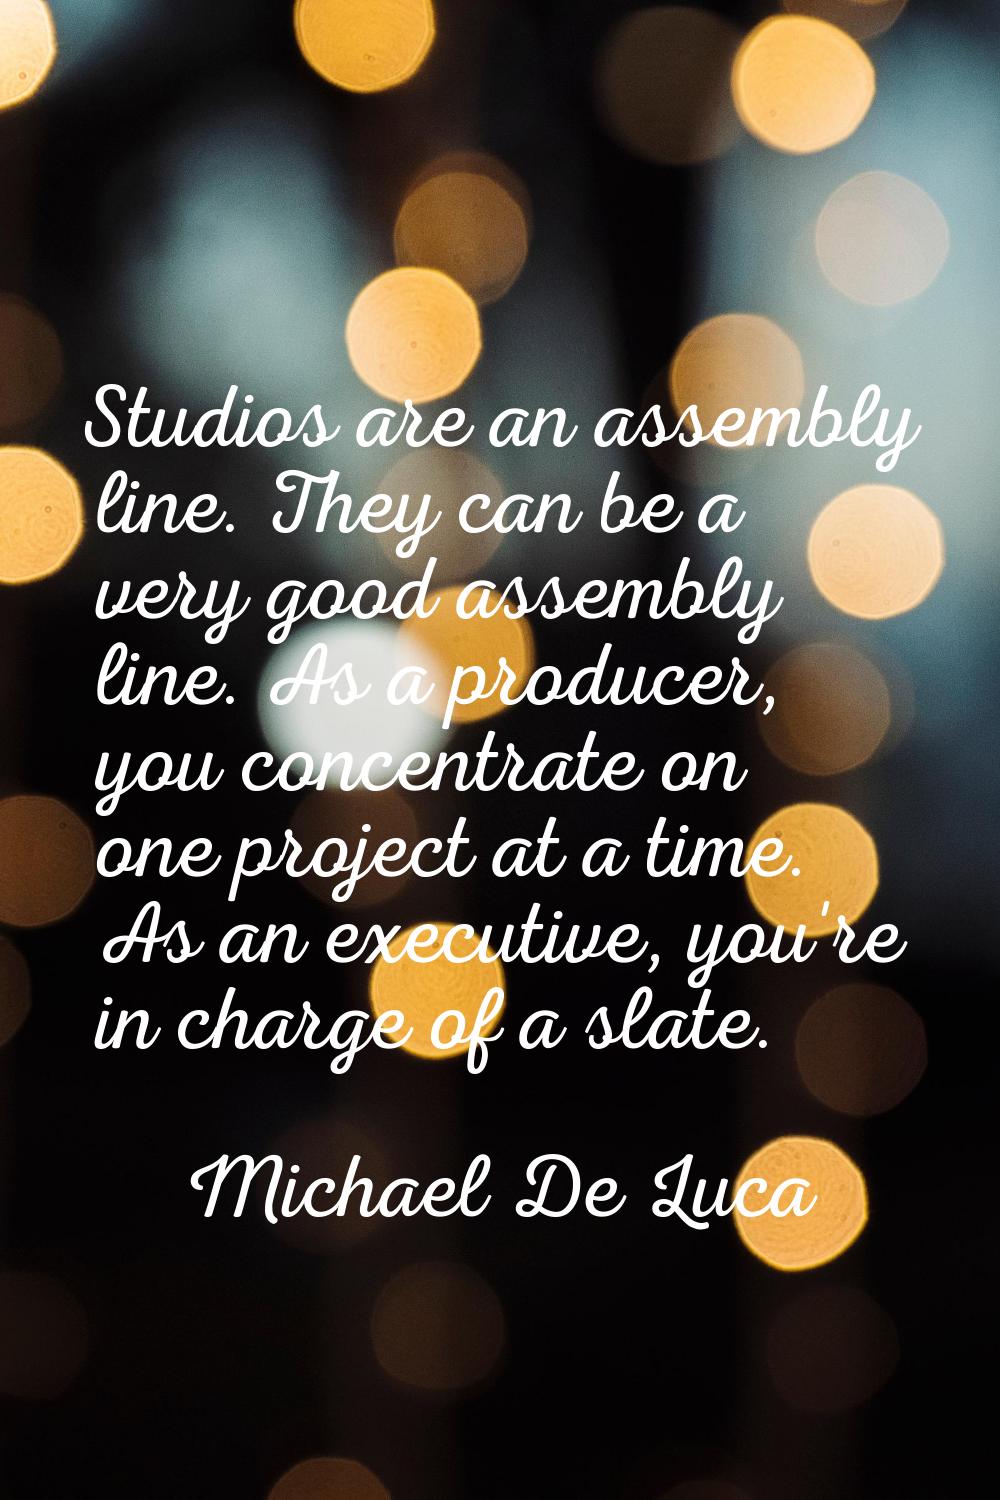 Studios are an assembly line. They can be a very good assembly line. As a producer, you concentrate